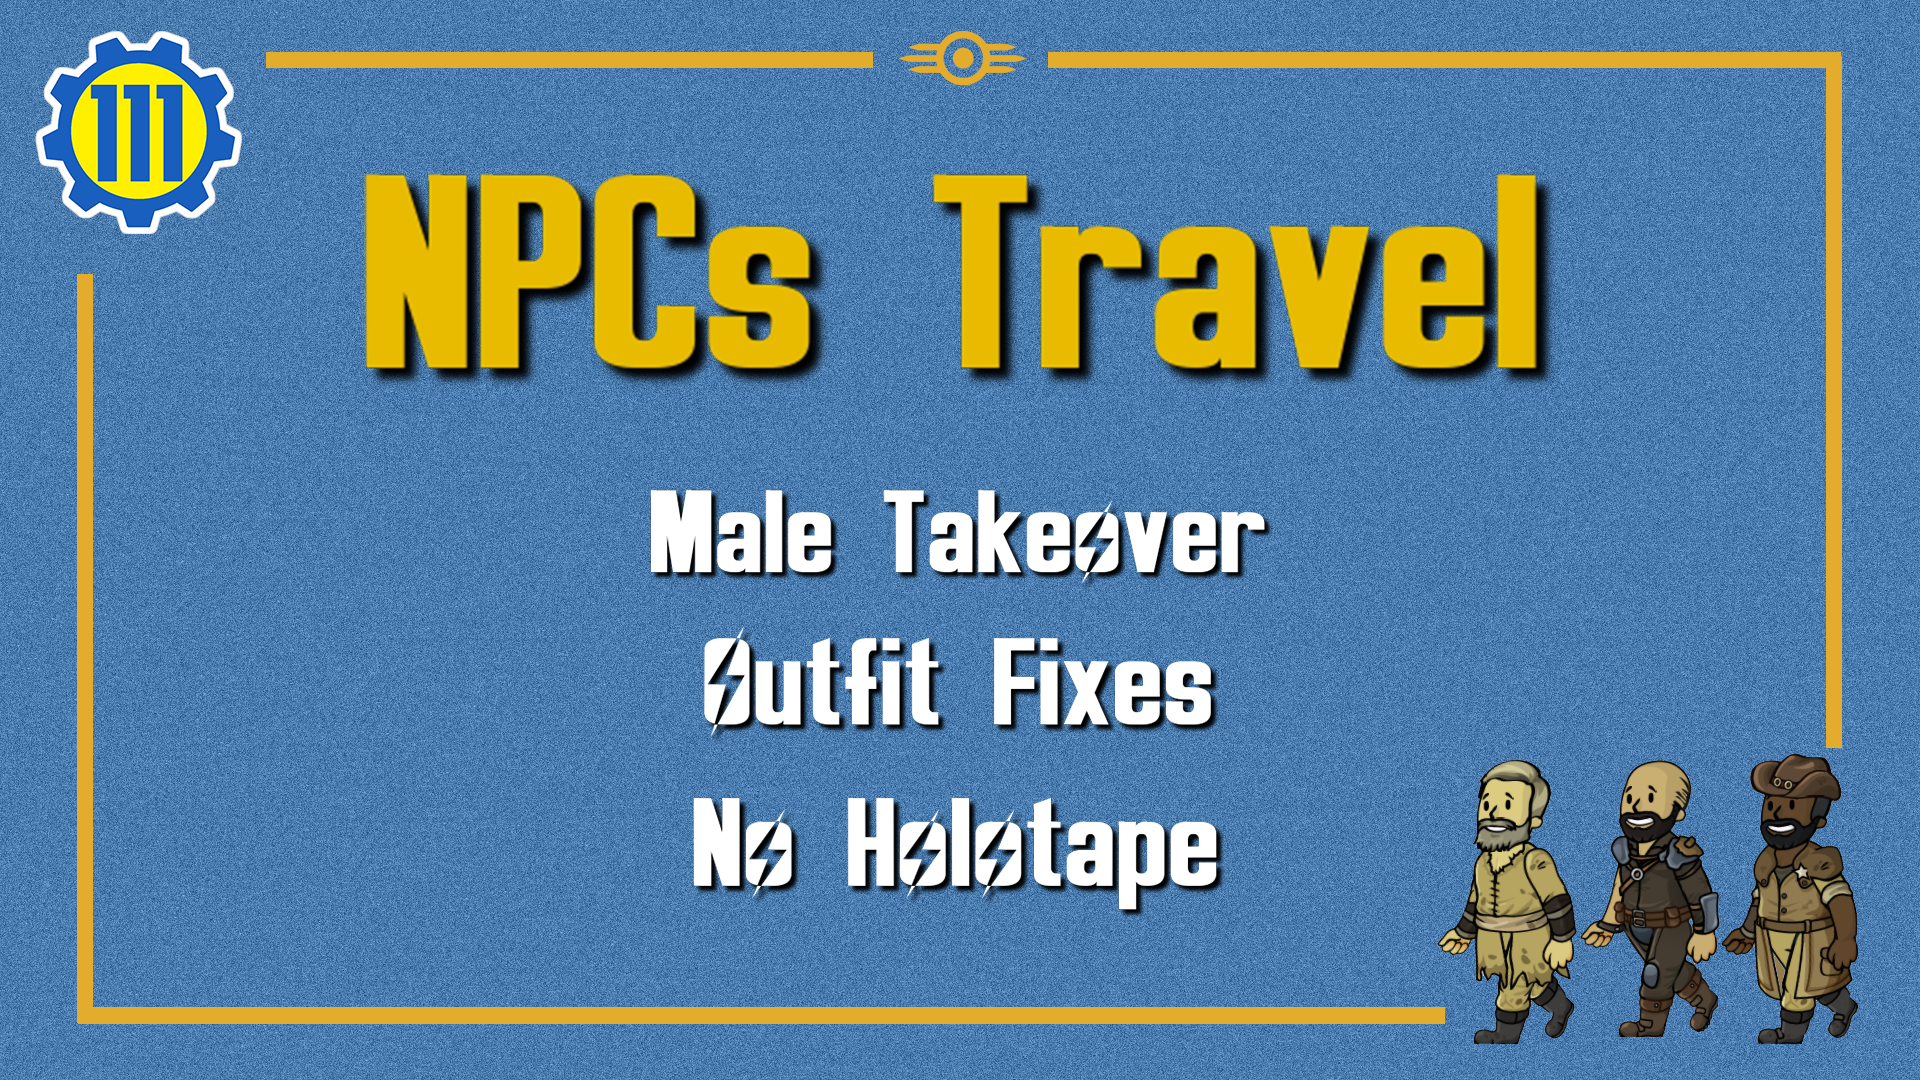 NPCs Travel - Male Takeover, Outfits Fixes and Remove Holotape